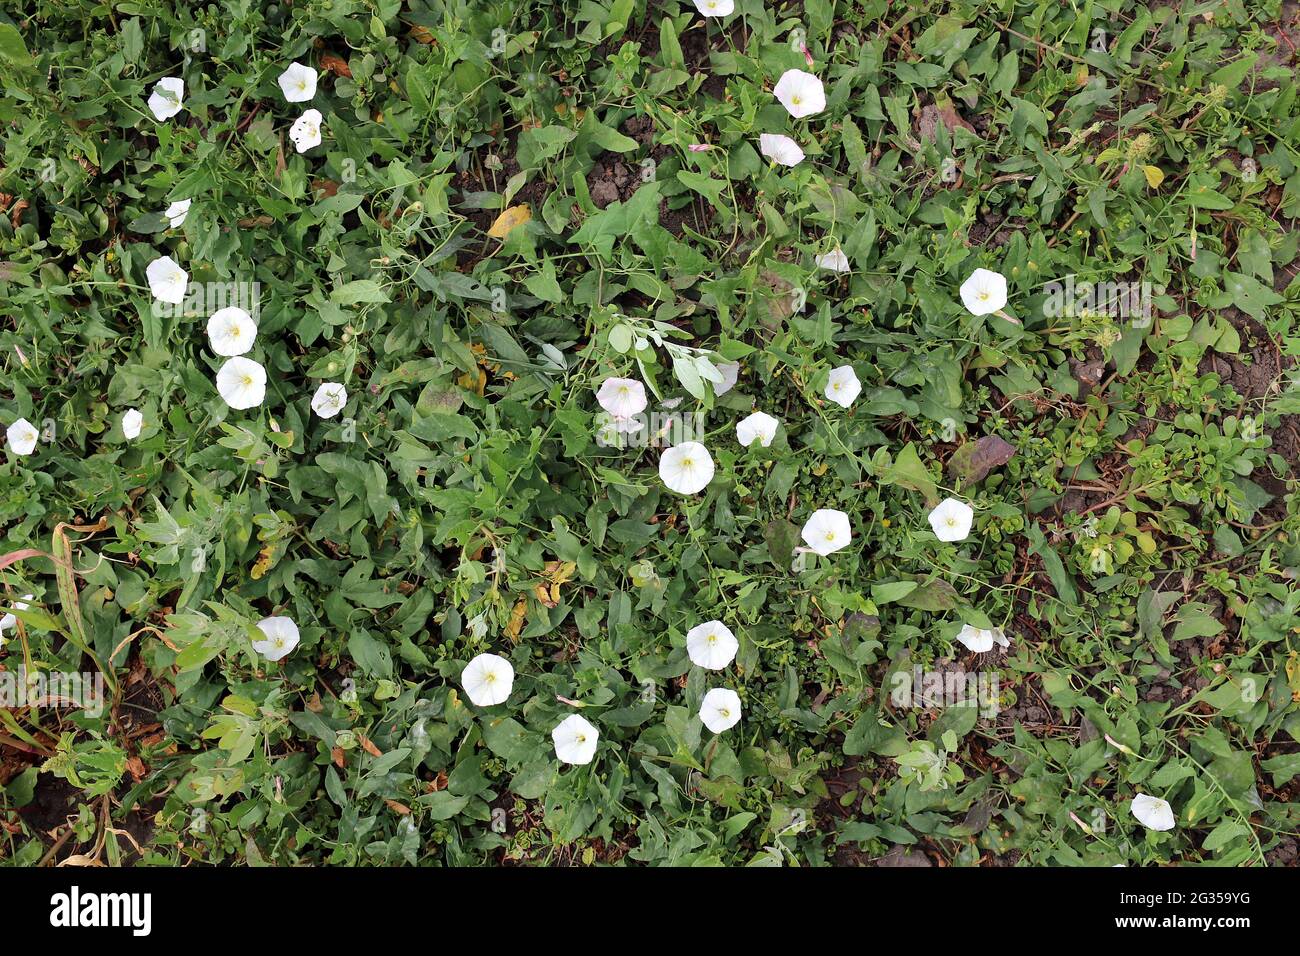 Weed Morning glory or Lesser bindweed, Convolvulus arvensis flowers Stock Photo